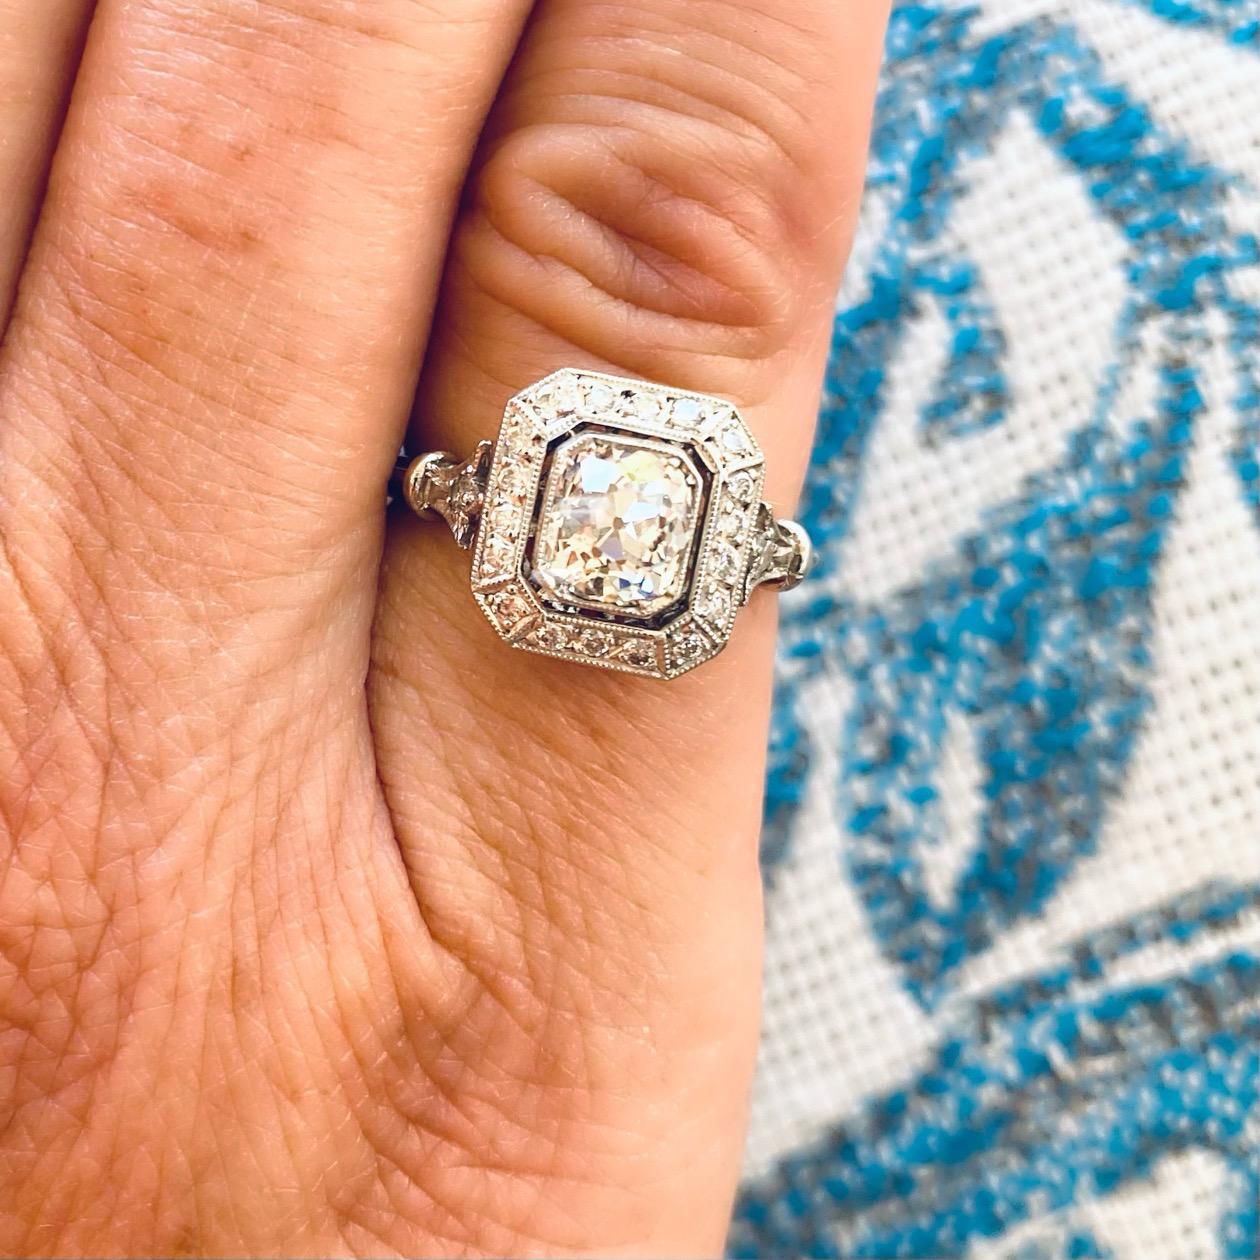 Fabulous 1.02ct Old Mine Cut Platinum Diamond Ring In Excellent Condition For Sale In San Francisco, CA